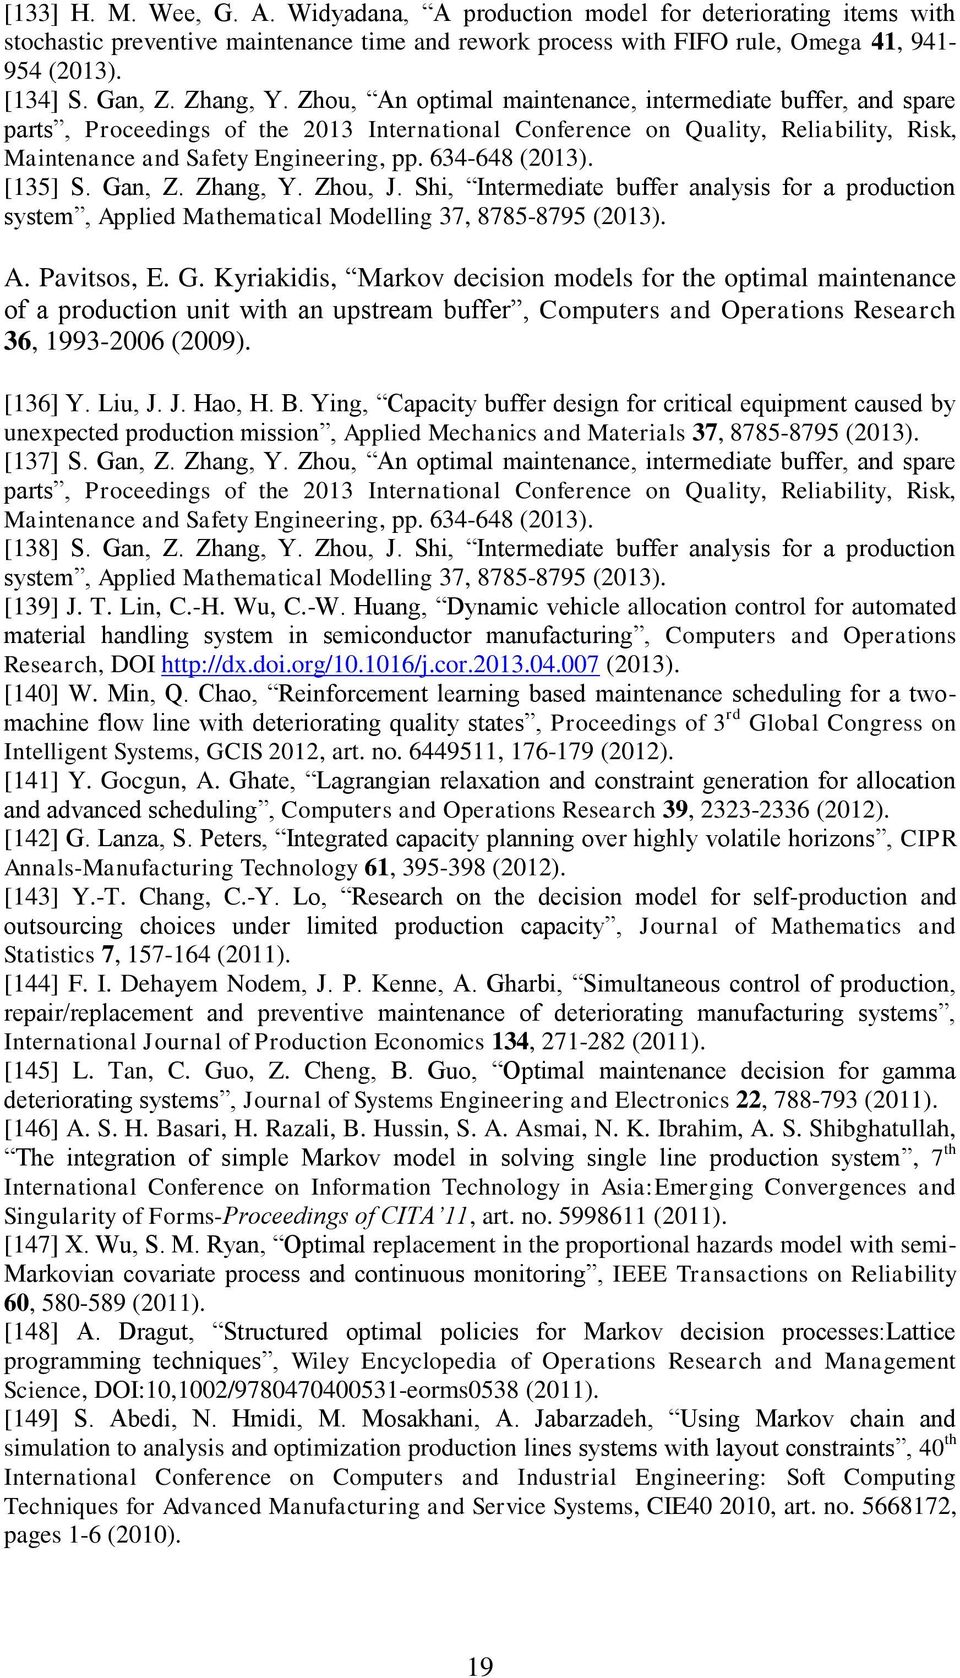 634-648 (2013). [135] S. Gan, Z. Zhang, Y. Zhou, J. Shi, Intermediate buffer analysis for a production system, Applied Mathematical Modelling 37, 8785-8795 (2013). A. Pavitsos, E. G. Kyriakidis, Markov decision models for the optimal maintenance of a production unit with an upstream buffer, Computers and Operations Research 36, 1993-2006 (2009).